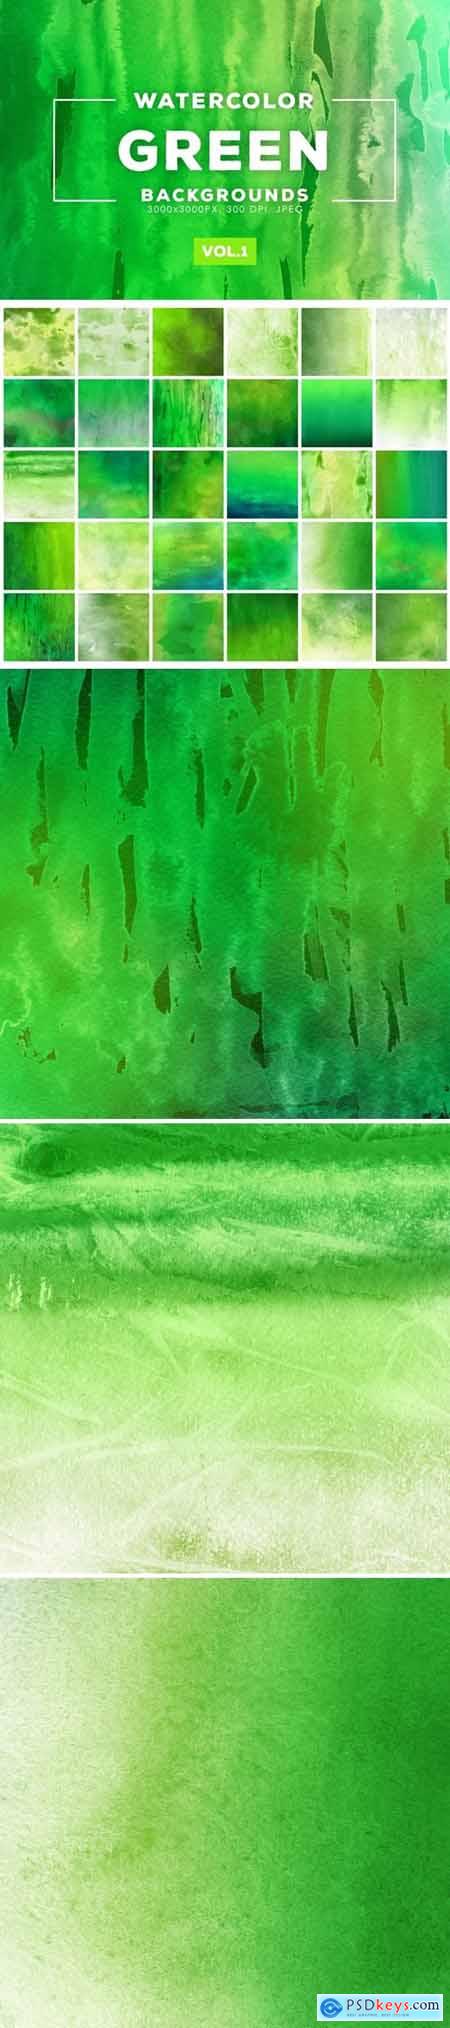 Green Watercolor Backgrounds Vol.1